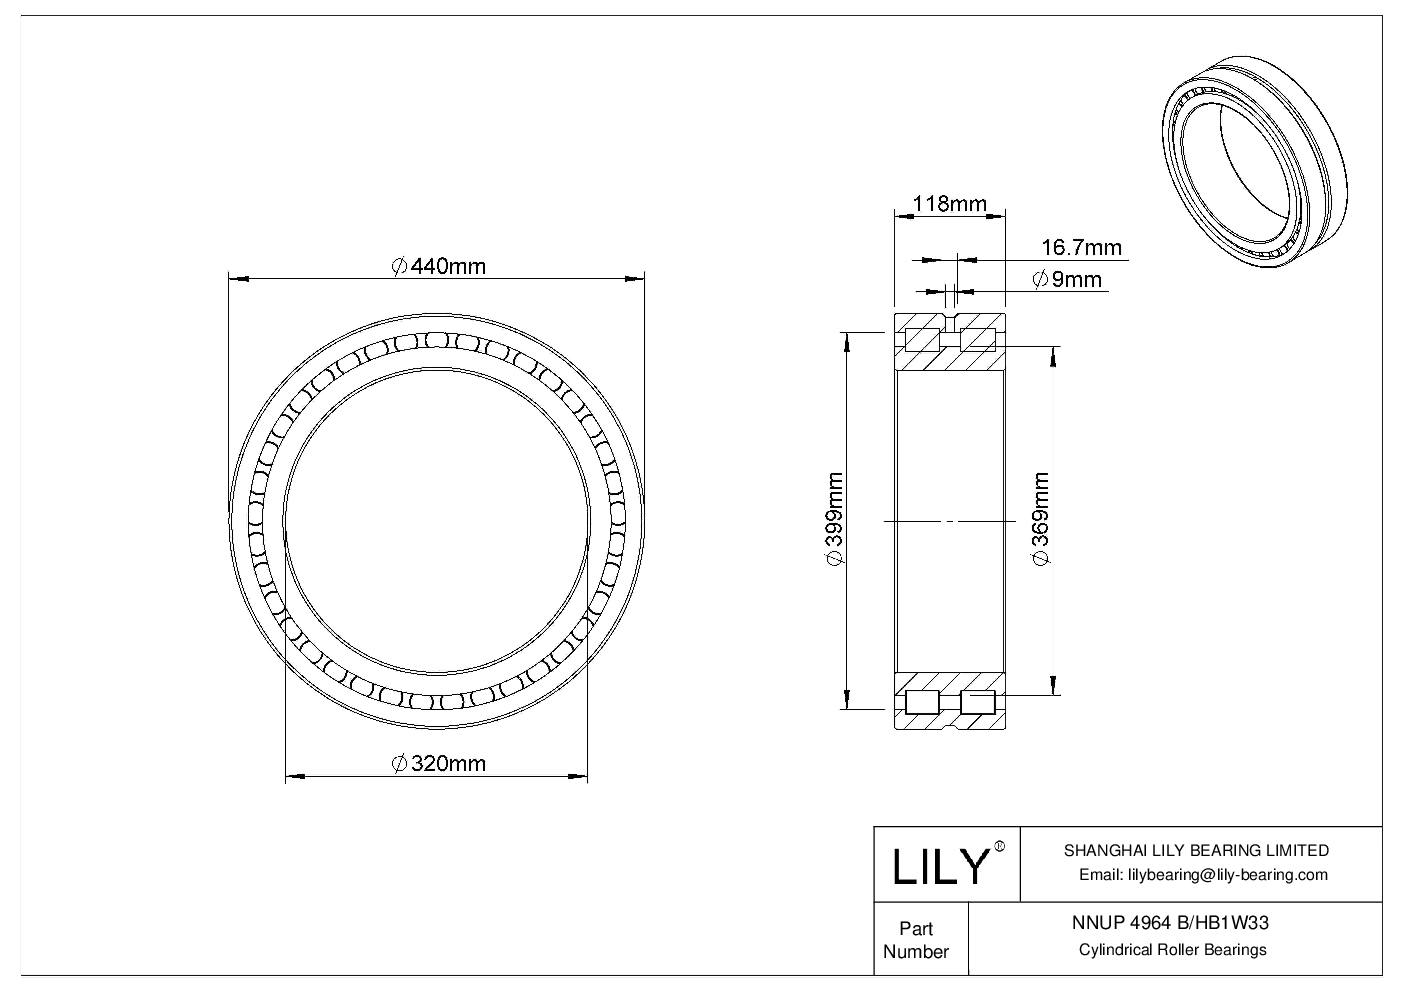 NNUP 4964 B/HB1W33 Double Row Cylindrical Roller Bearings cad drawing